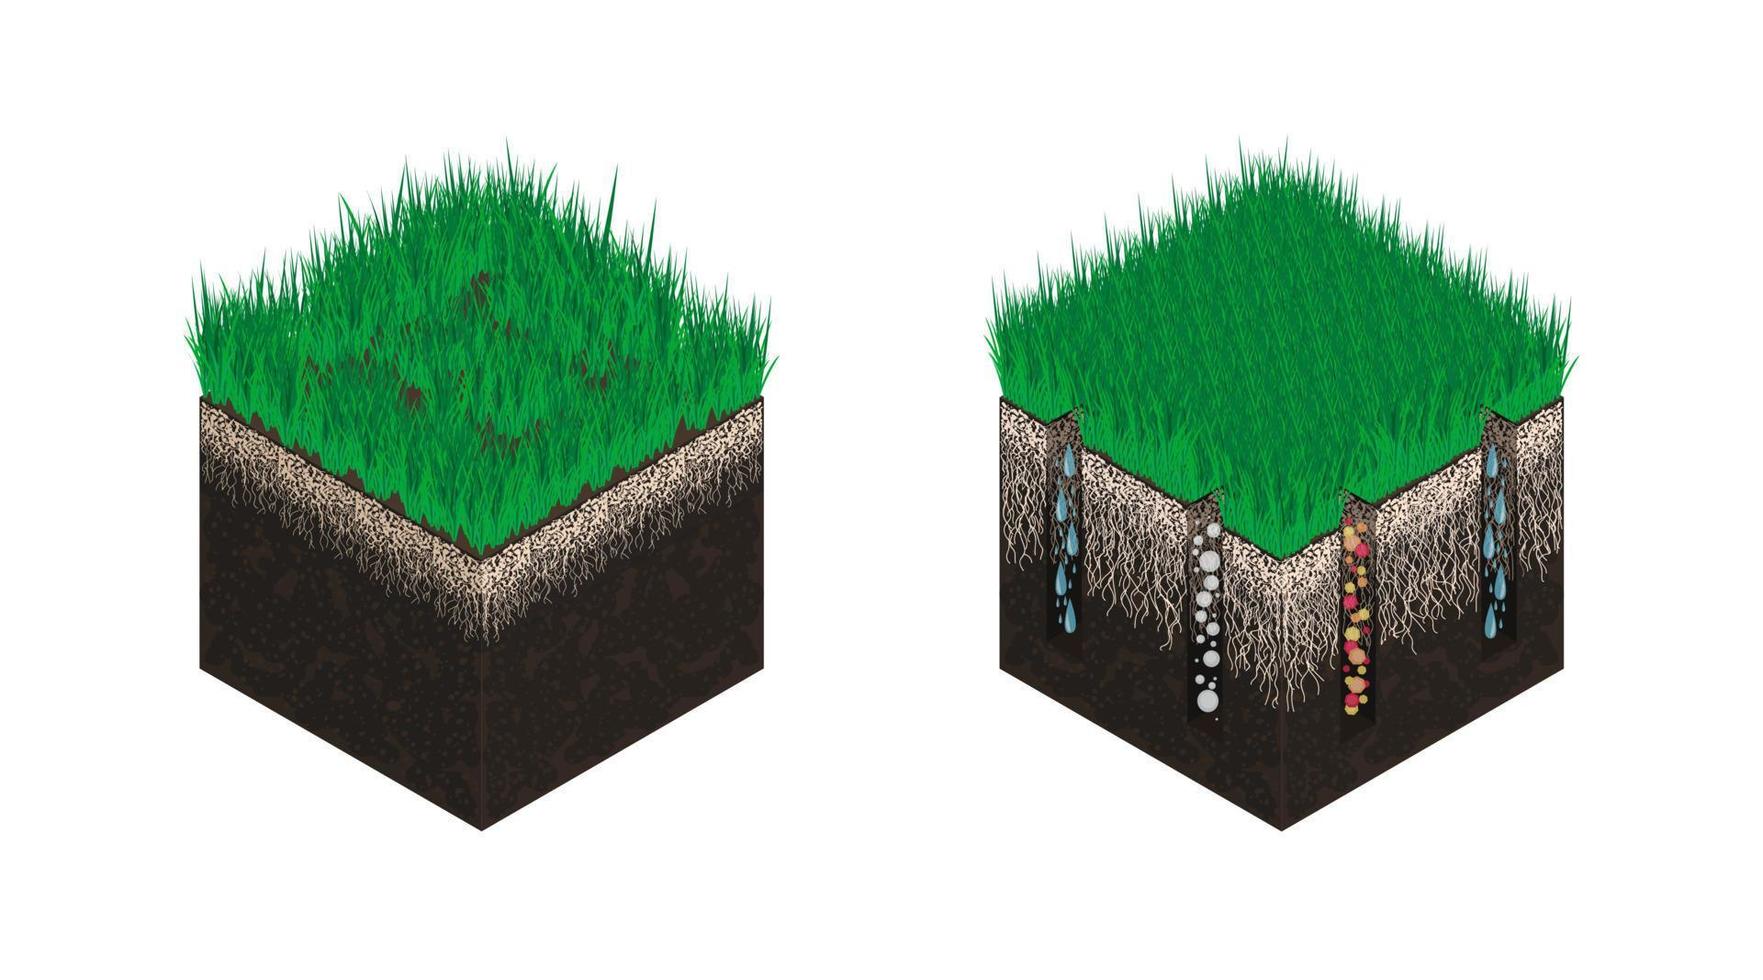 Lawn care, soil isometry, stages before and after aeration. Effect on the intake of substances - water, oxygen and nutrients for grass nutrition. Vector illustration isolated on a white background.